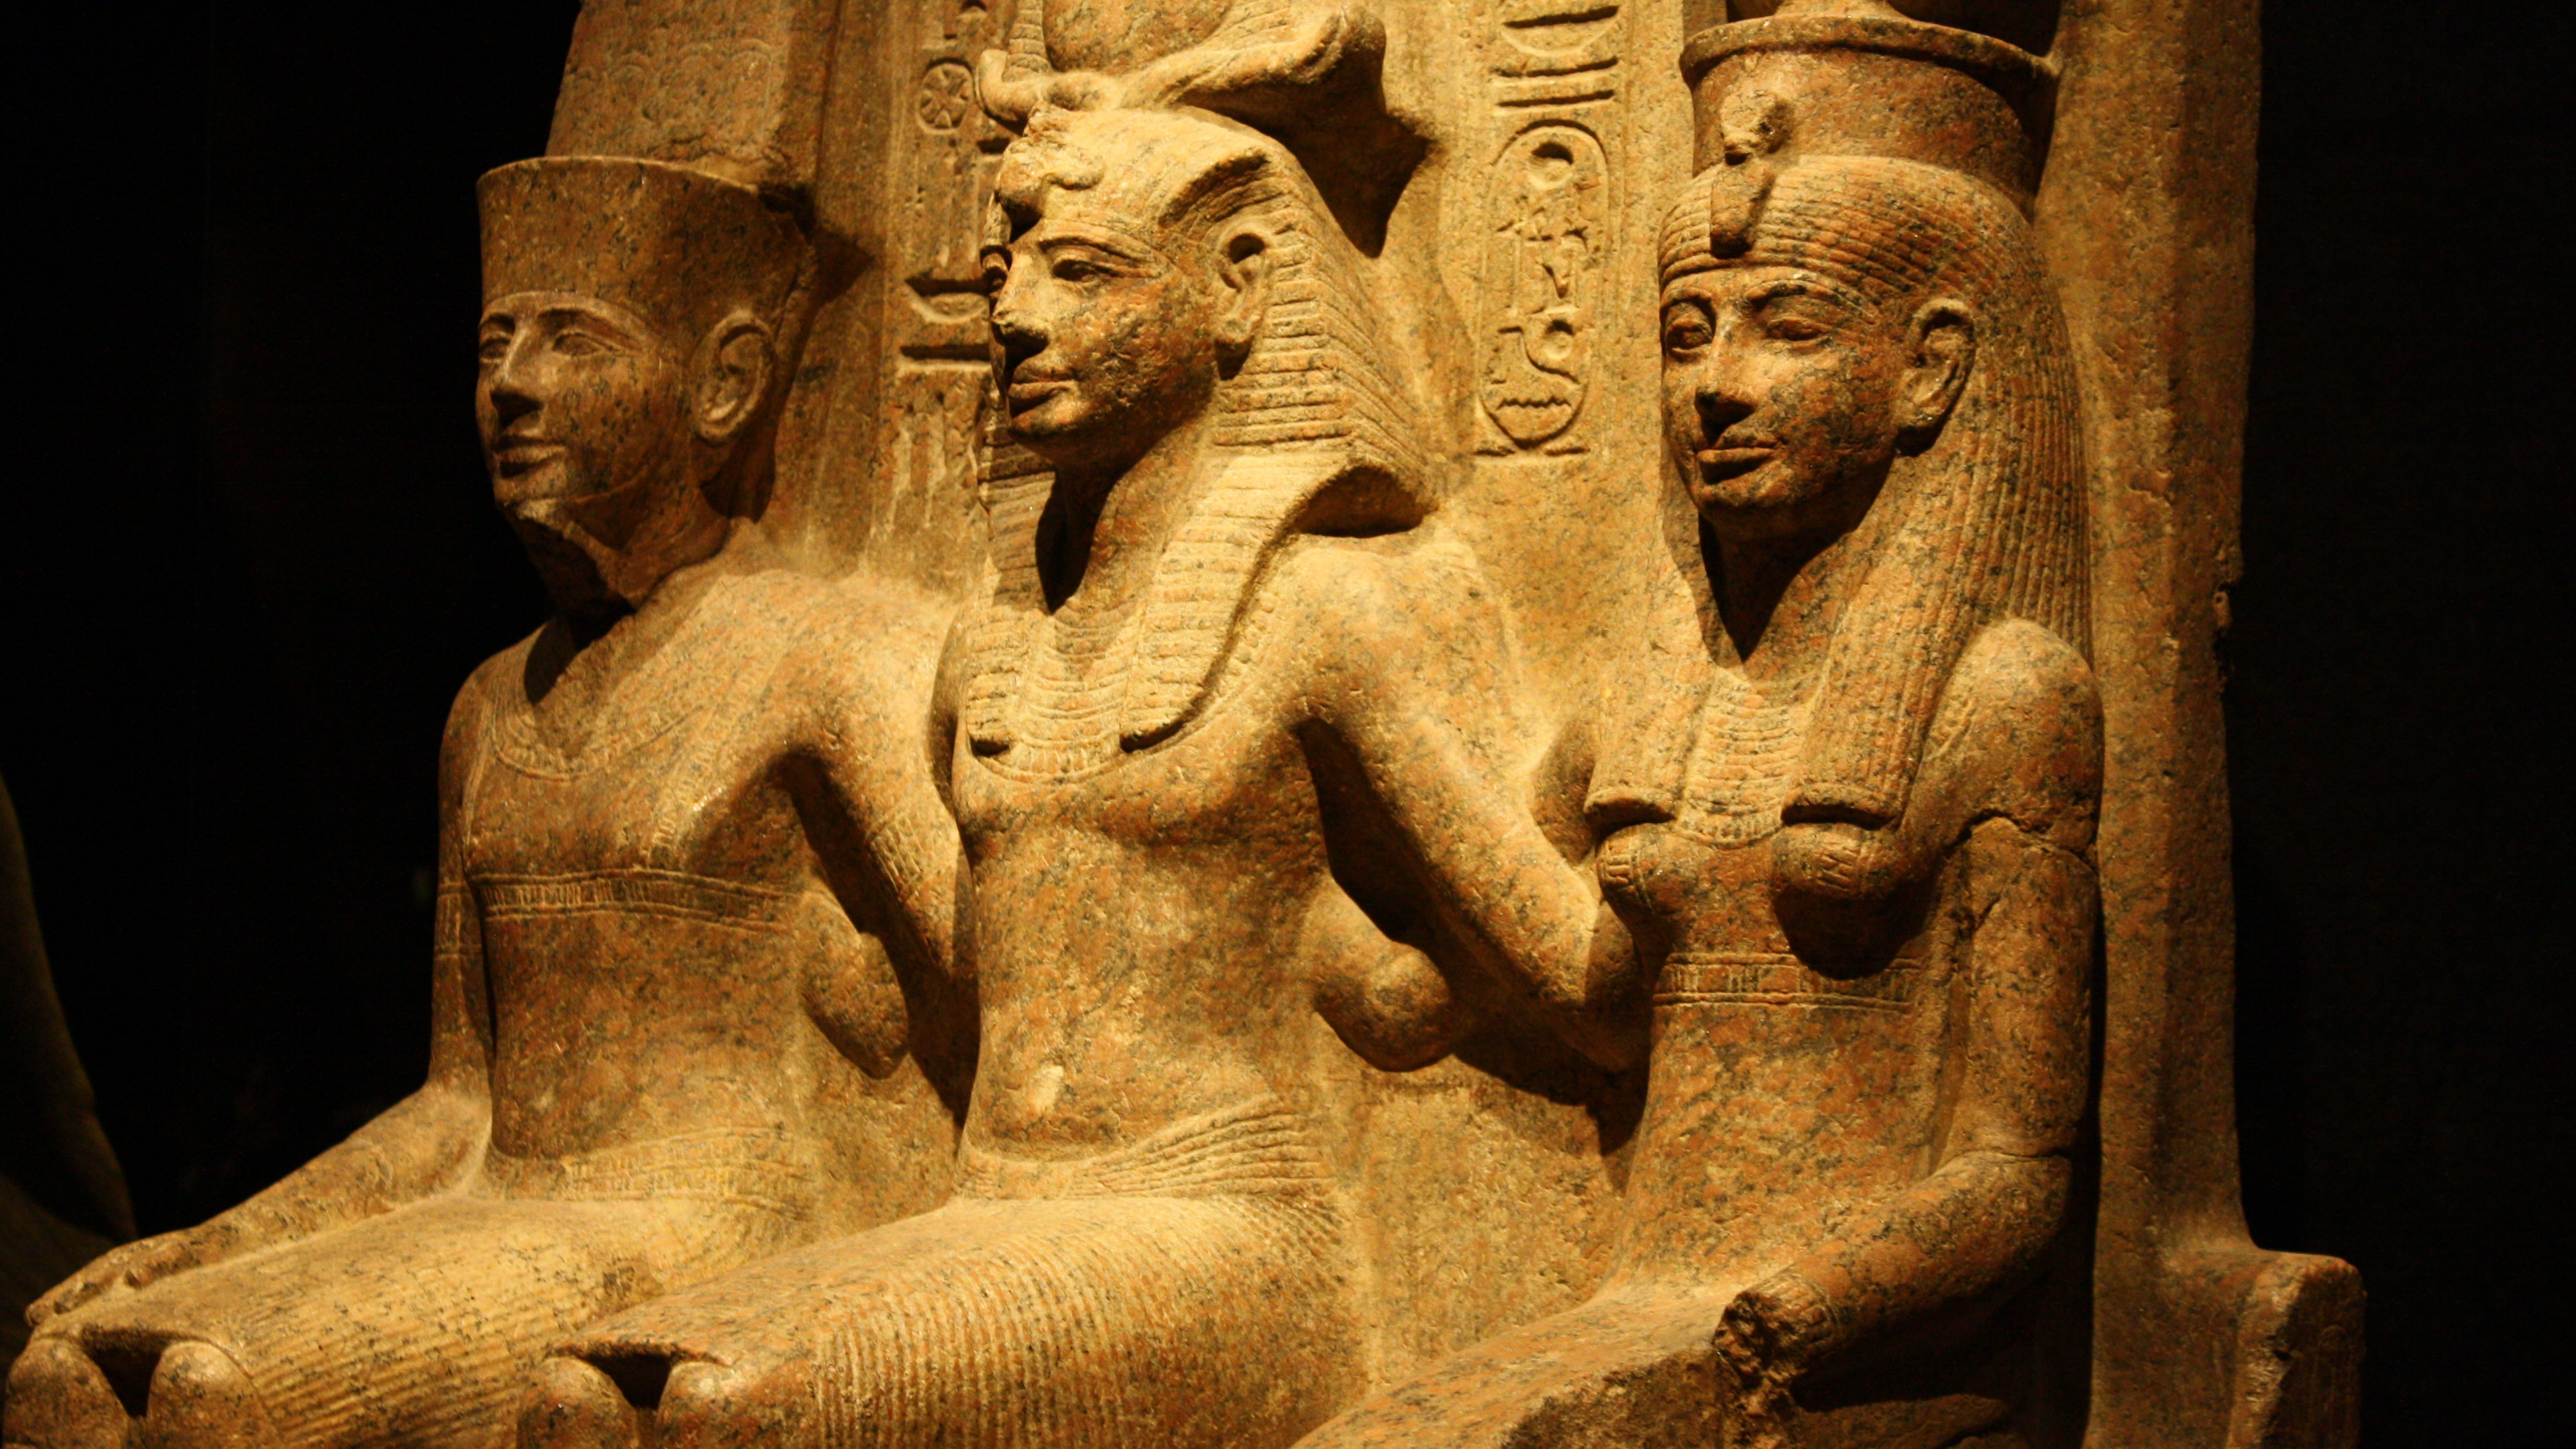 A granite monument depicting the god Amun, Ramesses II, & the goddess Mut from the Temple of Amun in Thebes. Image by Mark Cartwright, courtesy World History Encyclopedia, CC BY-NC-SA 4.0.